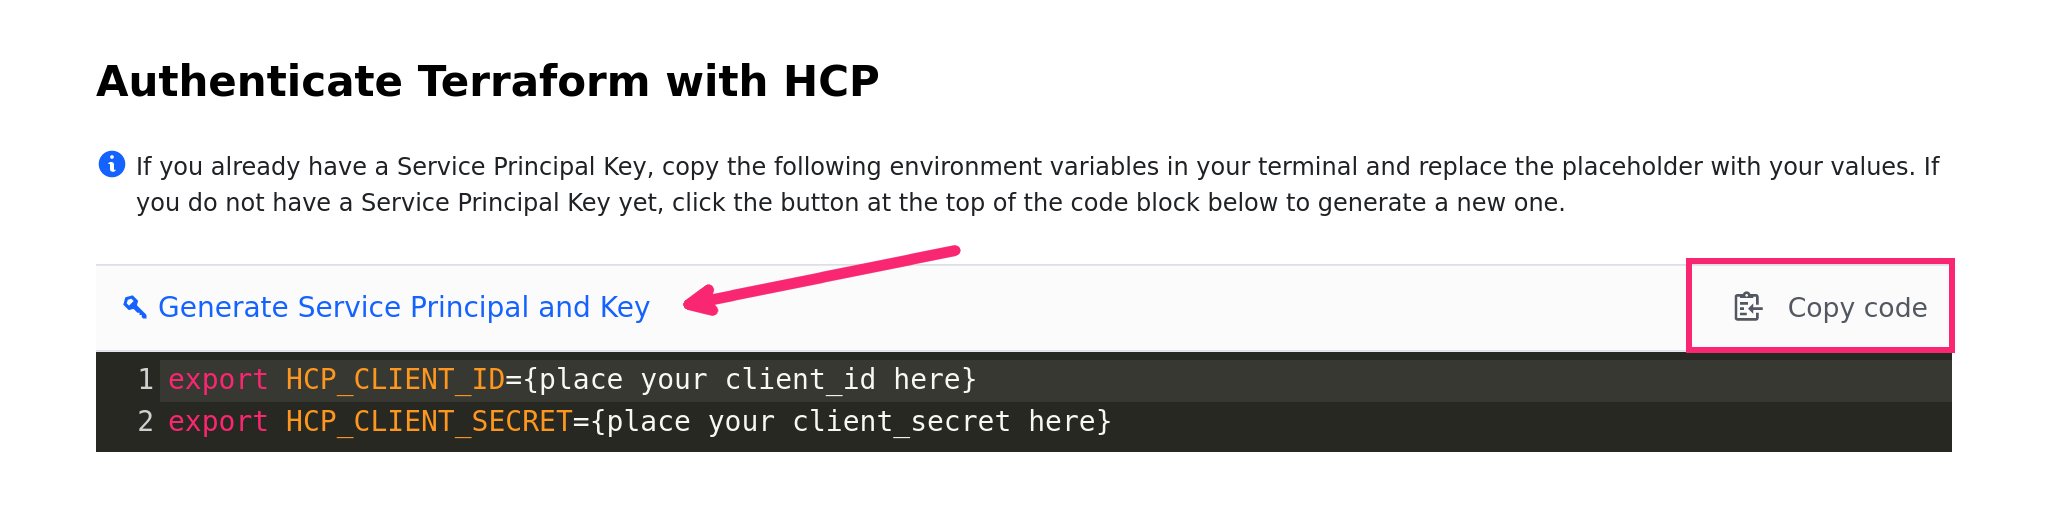 HCP UI Consul - Deploy with Terraform - Download TF code for EKS